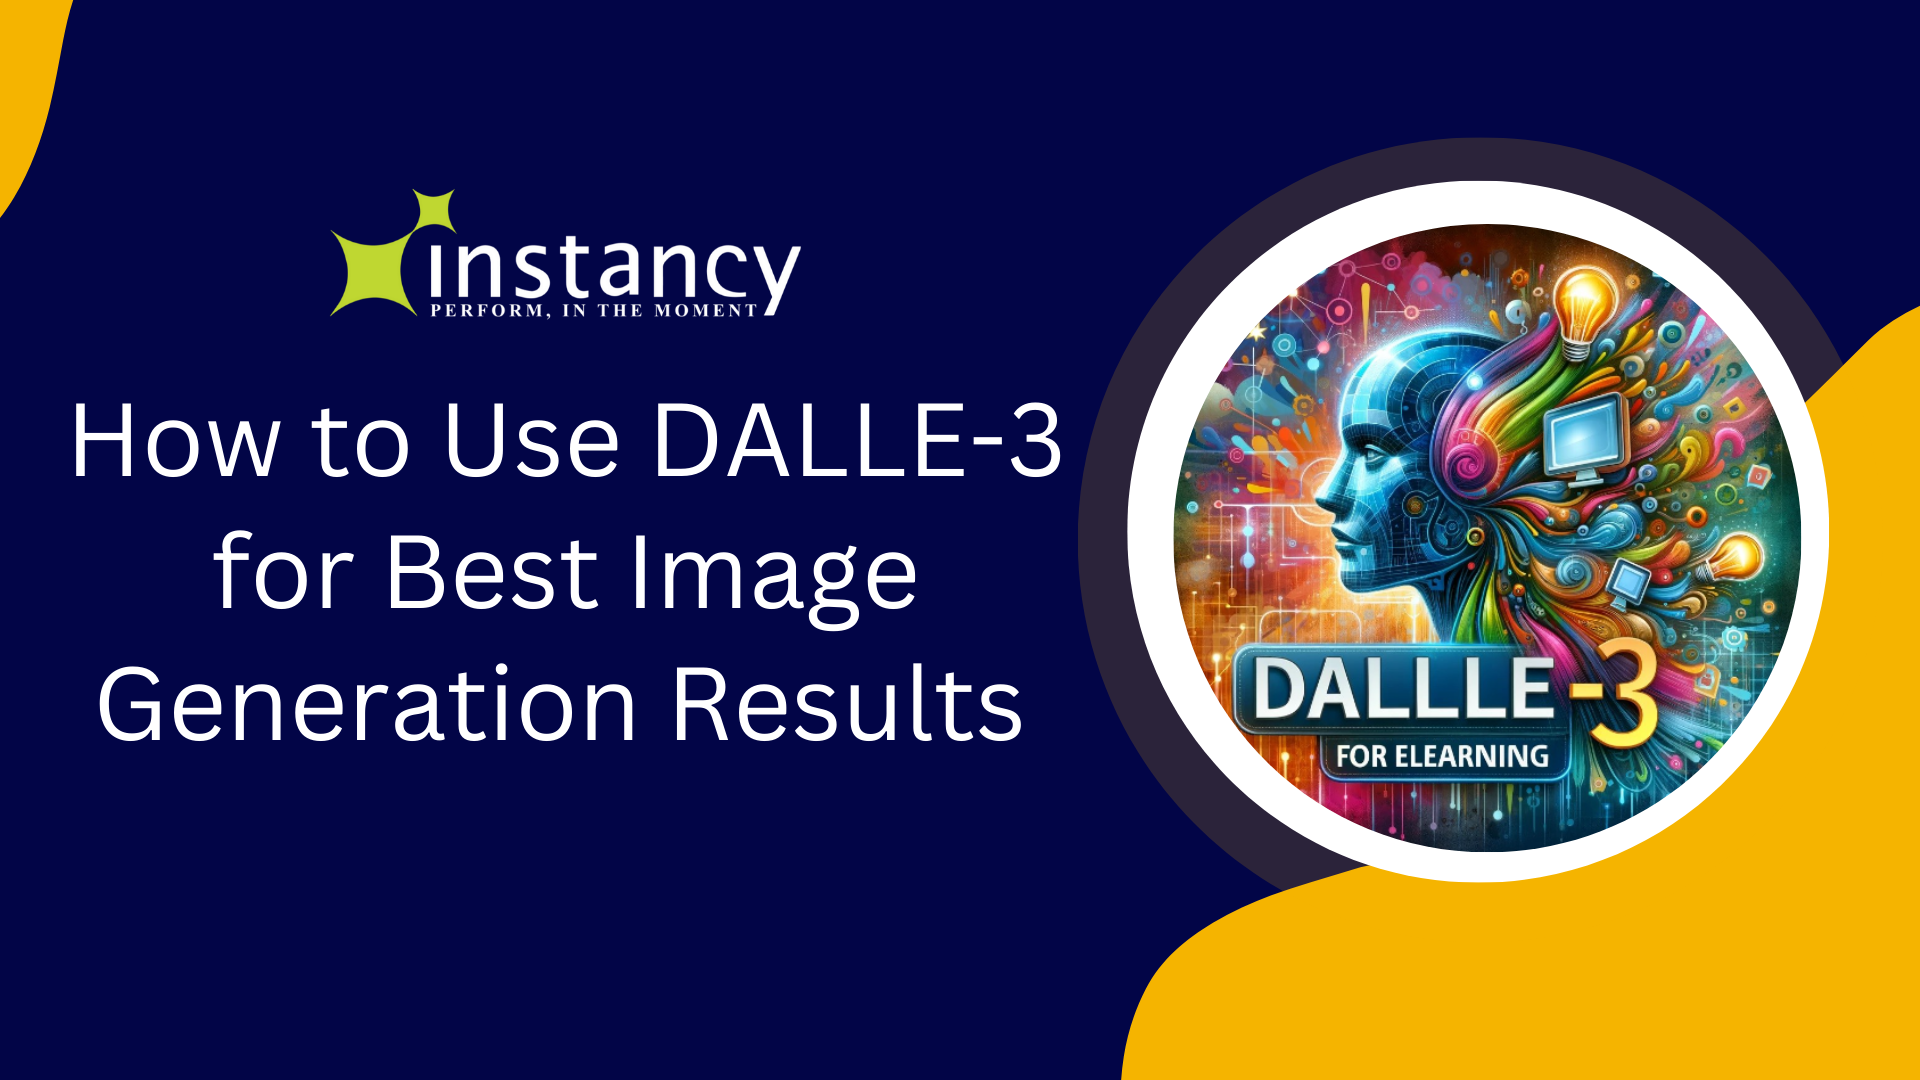 Dallle - 3 for image generation